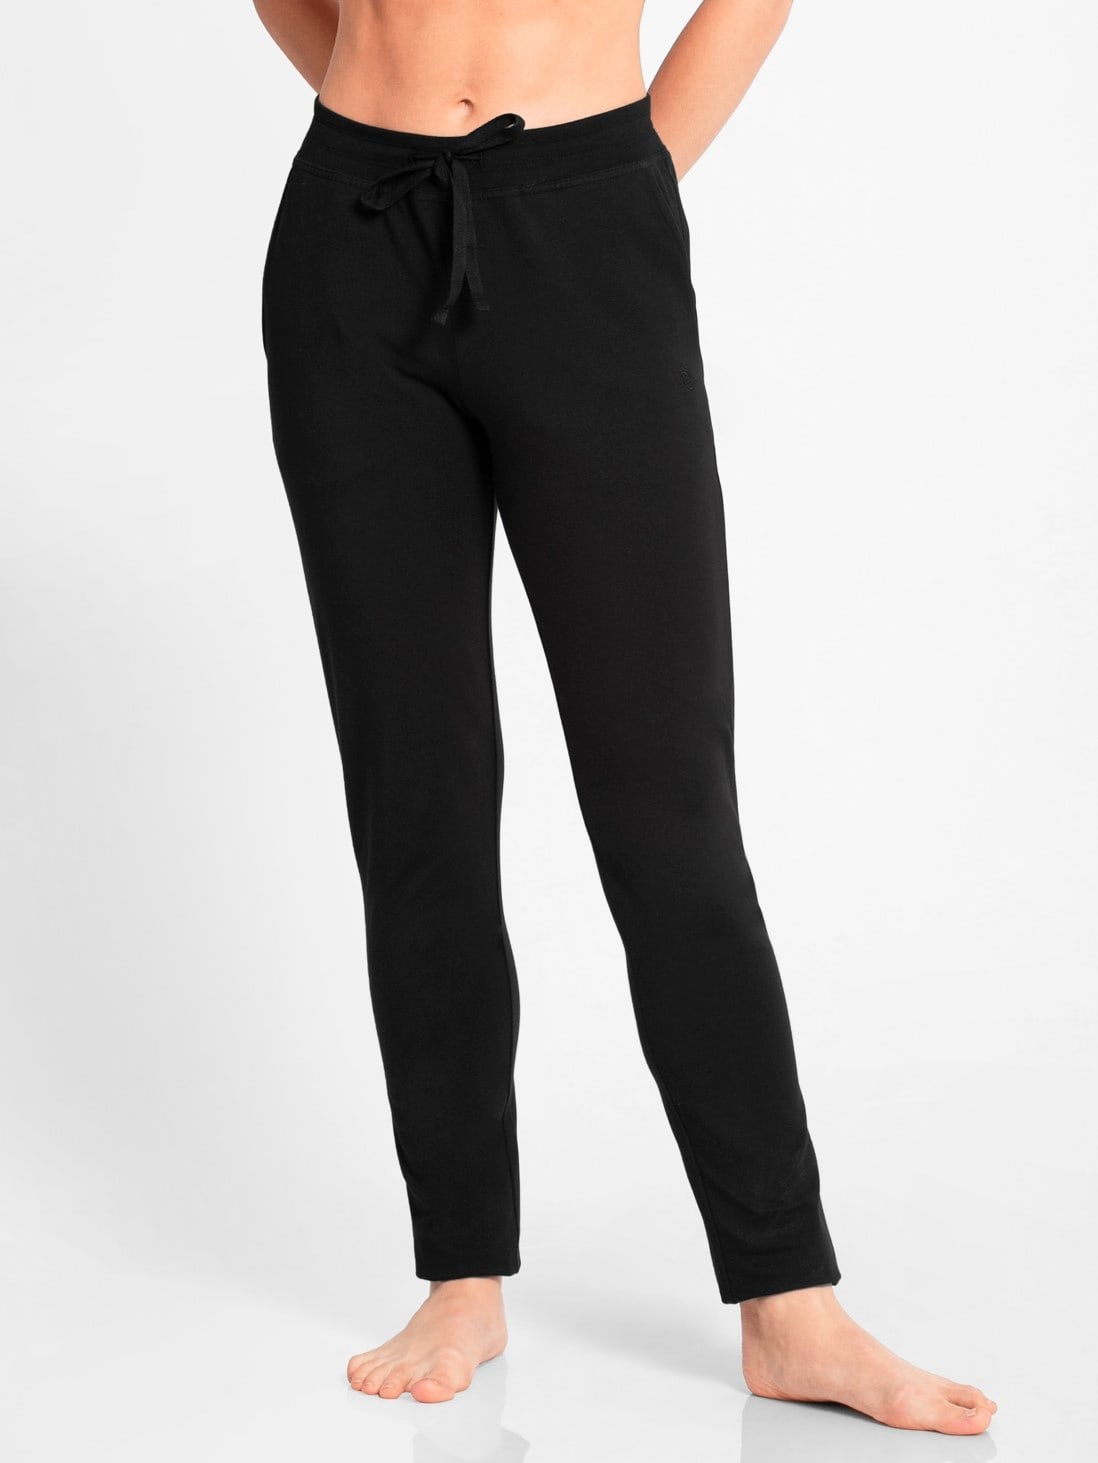 Buy Black Track Pant with Side Pocket & Drawstring Closure for Women ...